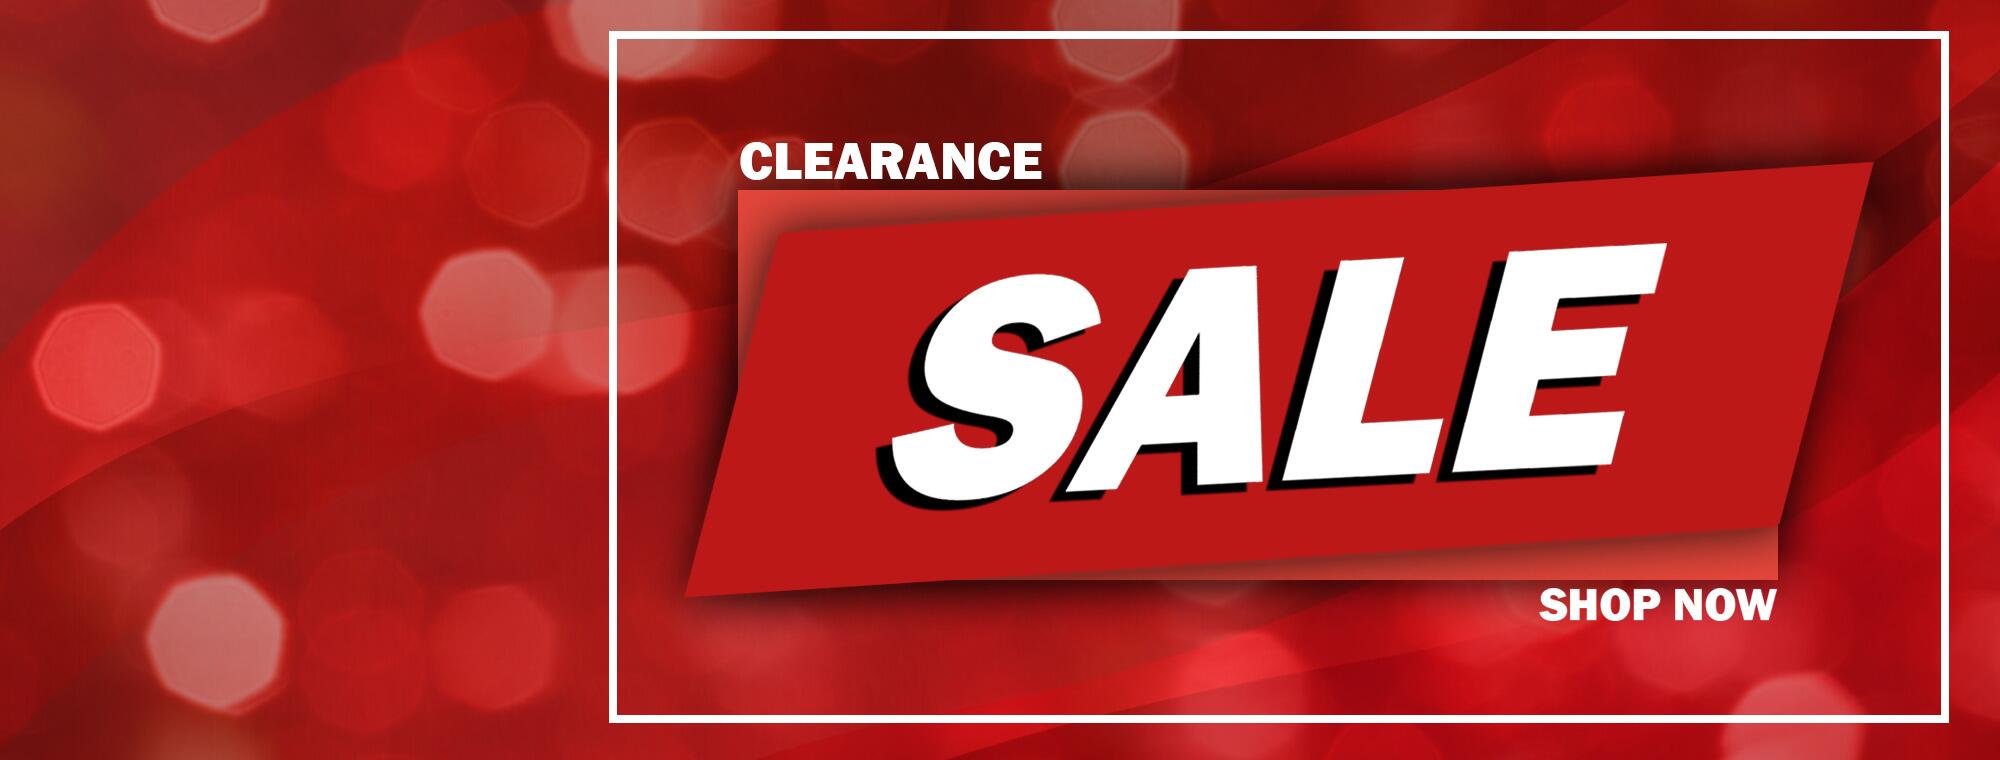 <h2>SALE & WAREHOUSE CLEARANCE</h2><p>Up to 50% off on many items!